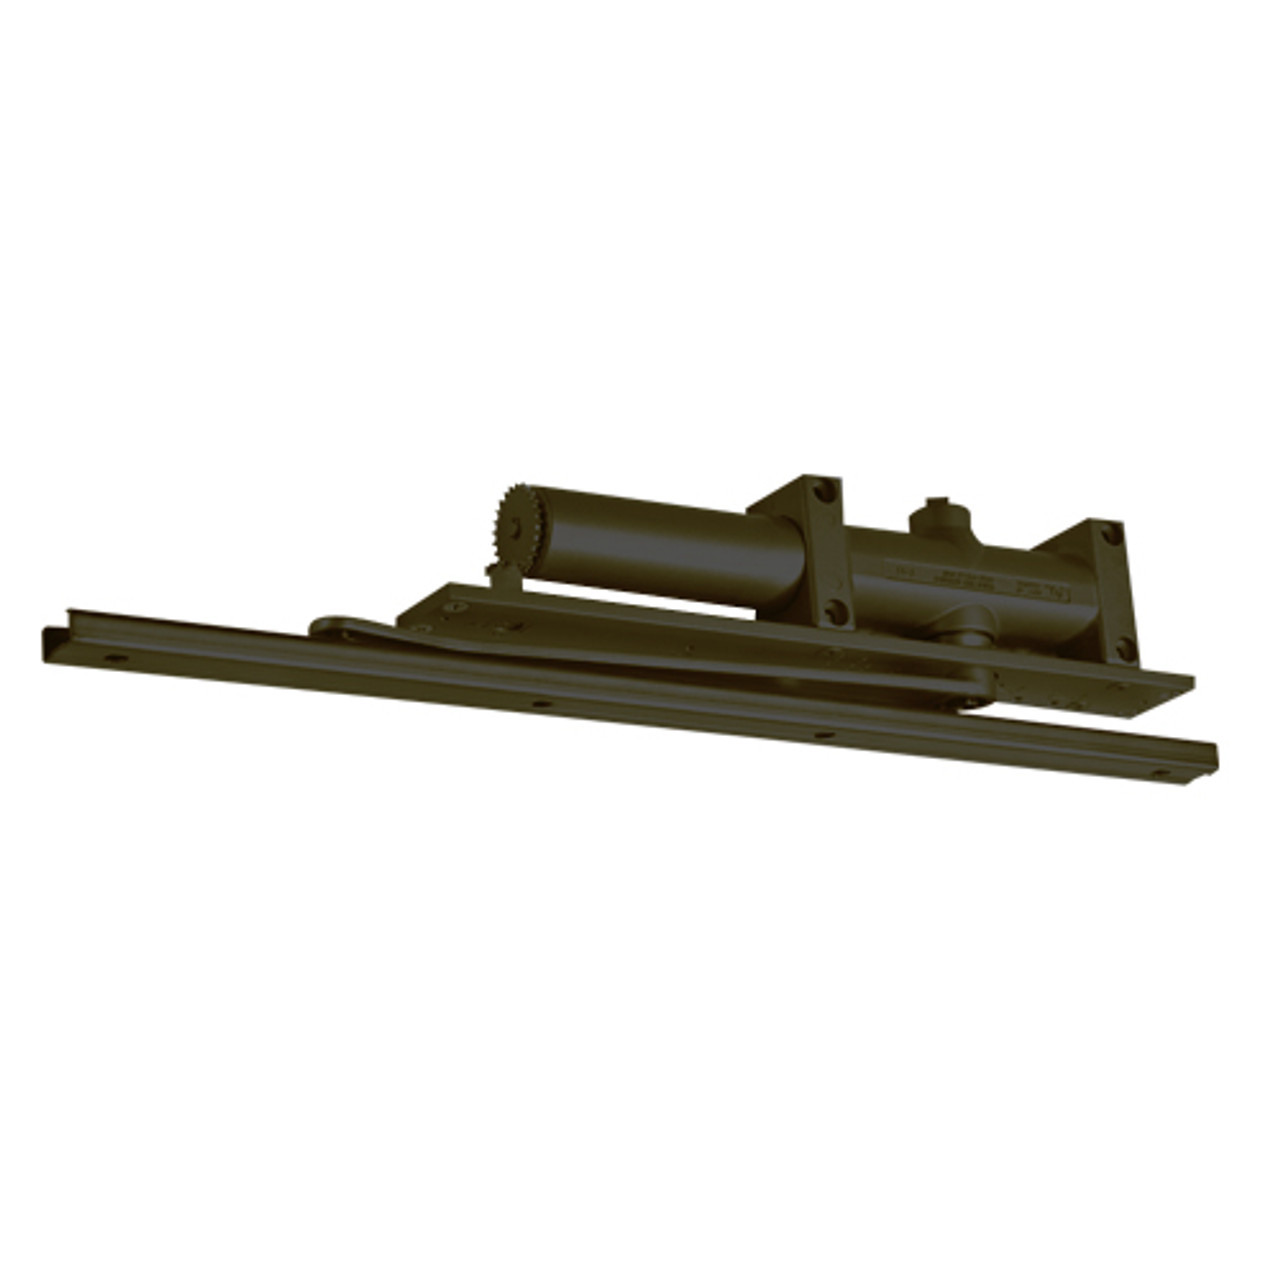 7905-694-RH Norton 7900 Series Non-Hold Open Overhead Concealed Closers with Spring Size 5 in Medium Amber Finish